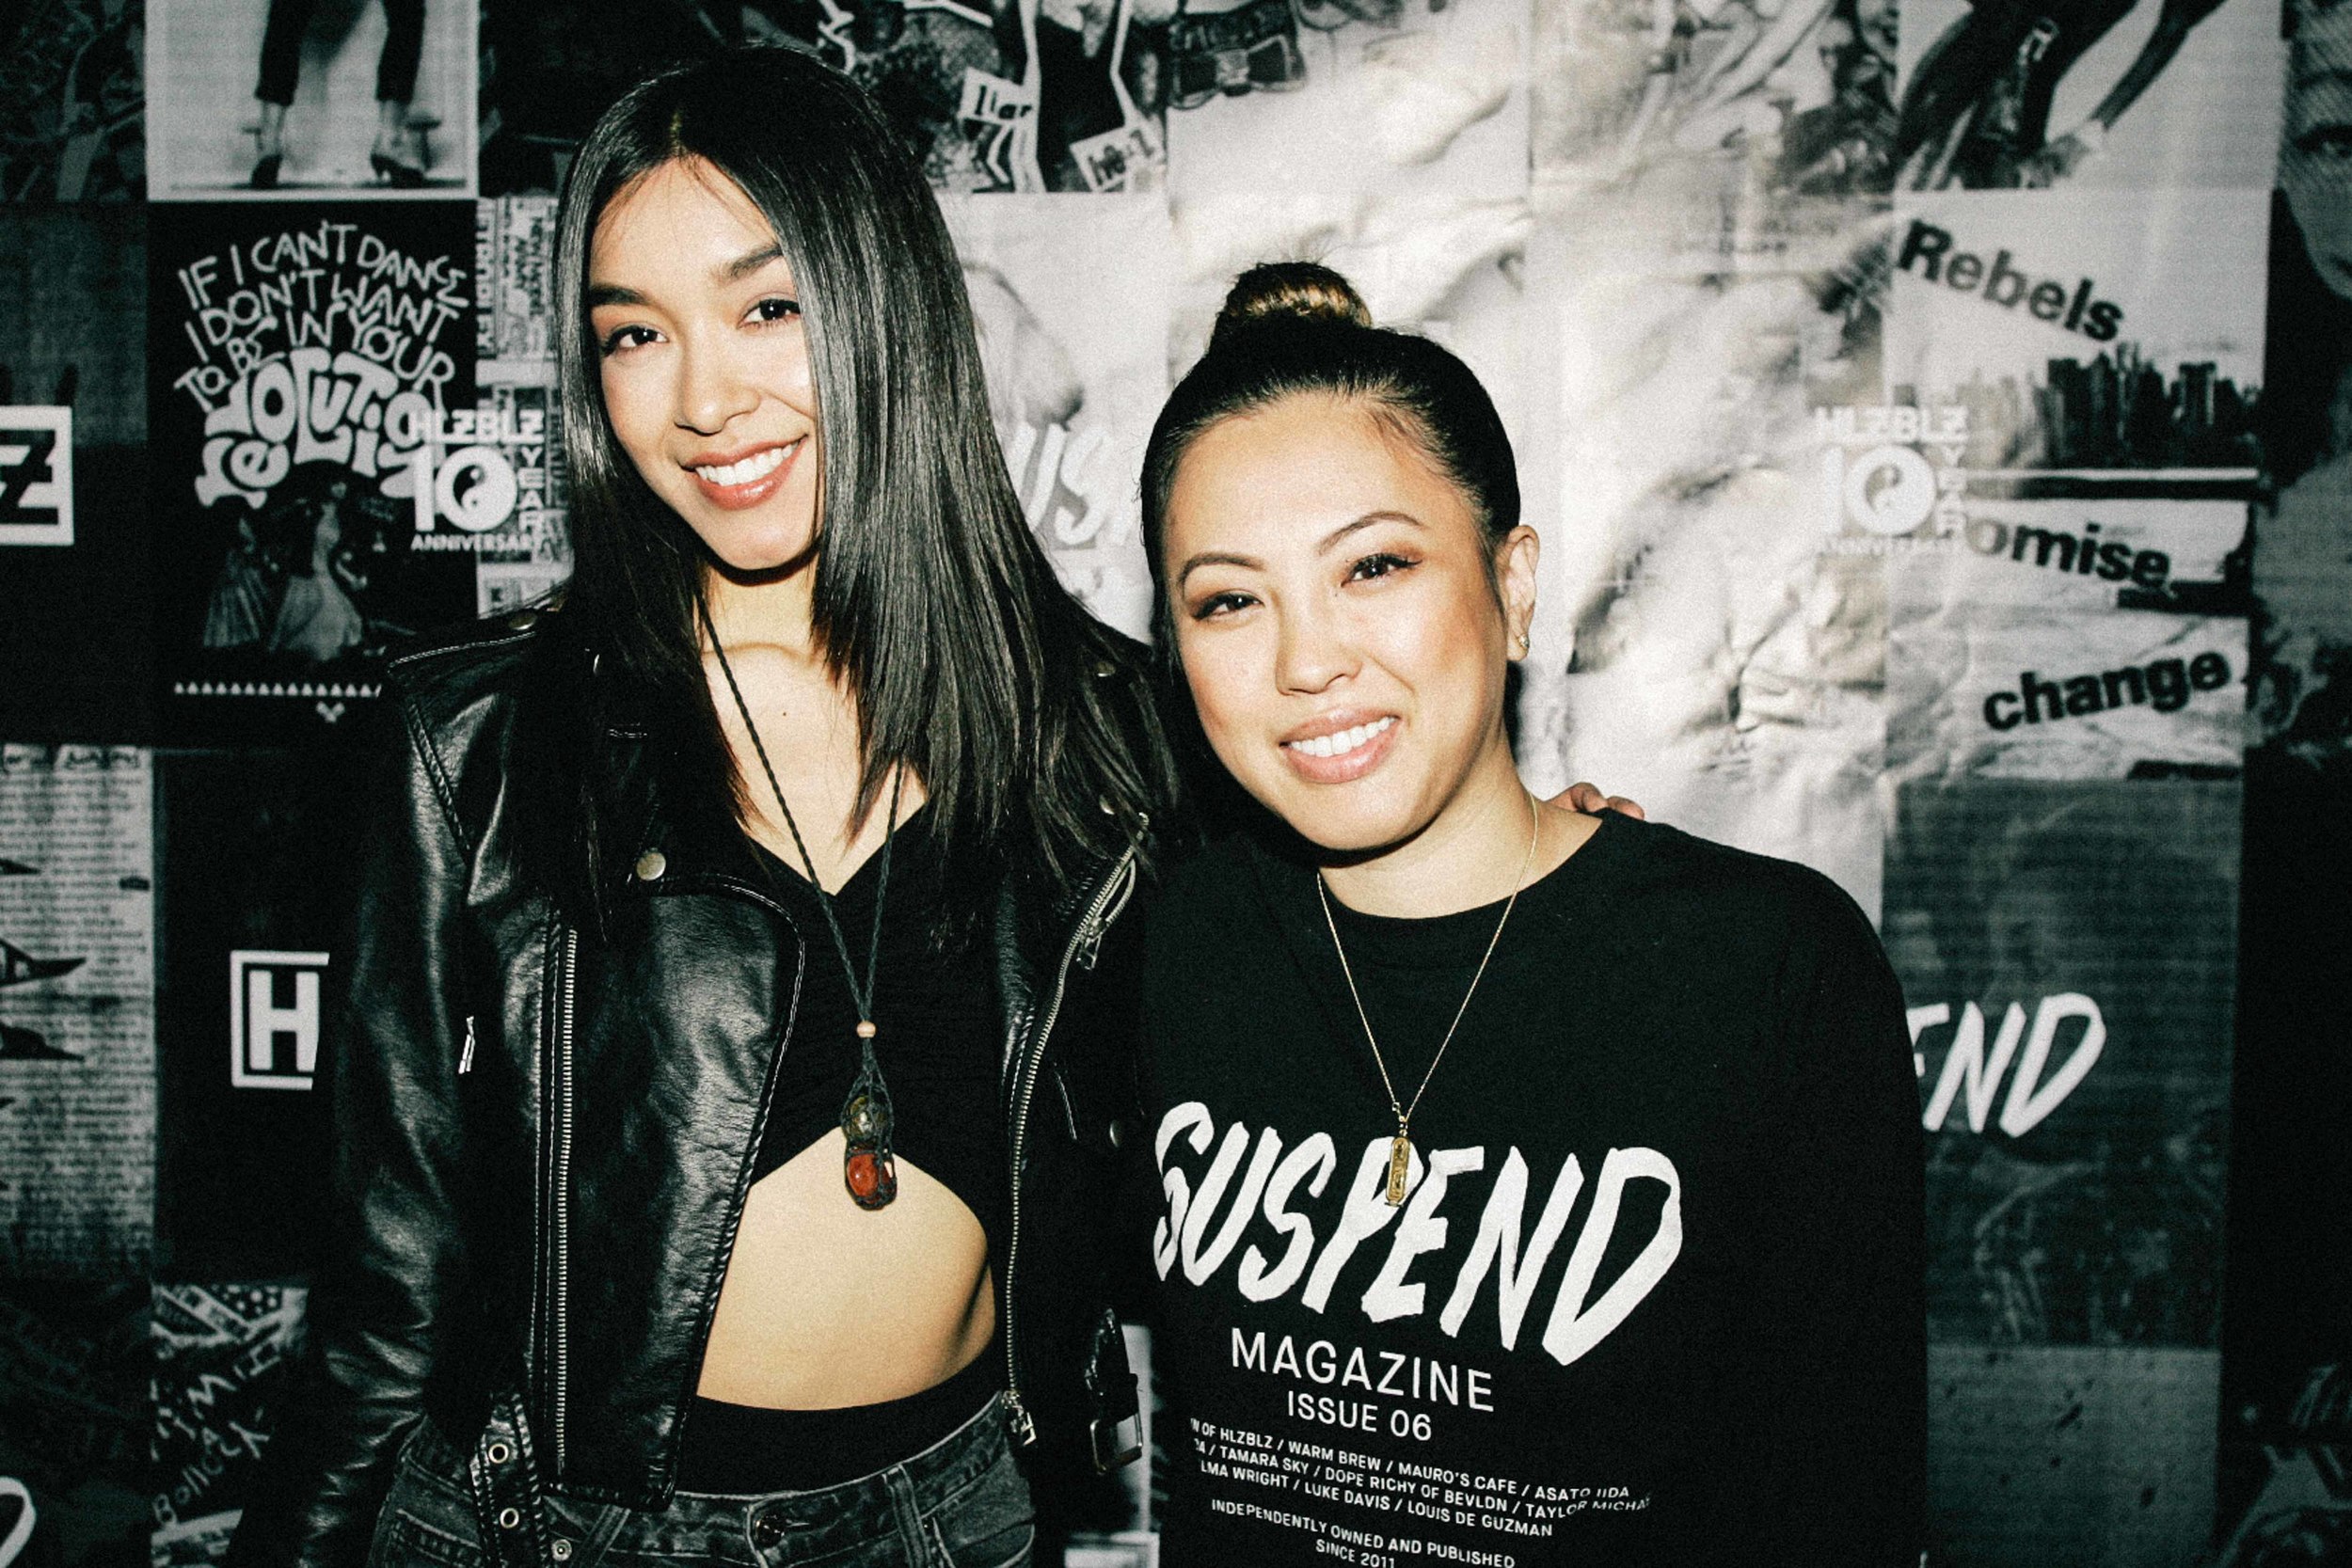  Sam Rea and EIC Diane Abapo at the ISSUE 06 Release Party x 10YR HLZBLZ Anniversary (Feb 11) at Globe Theater. / Photo: © Jonathan Tate for SUSPEND Magazine. 